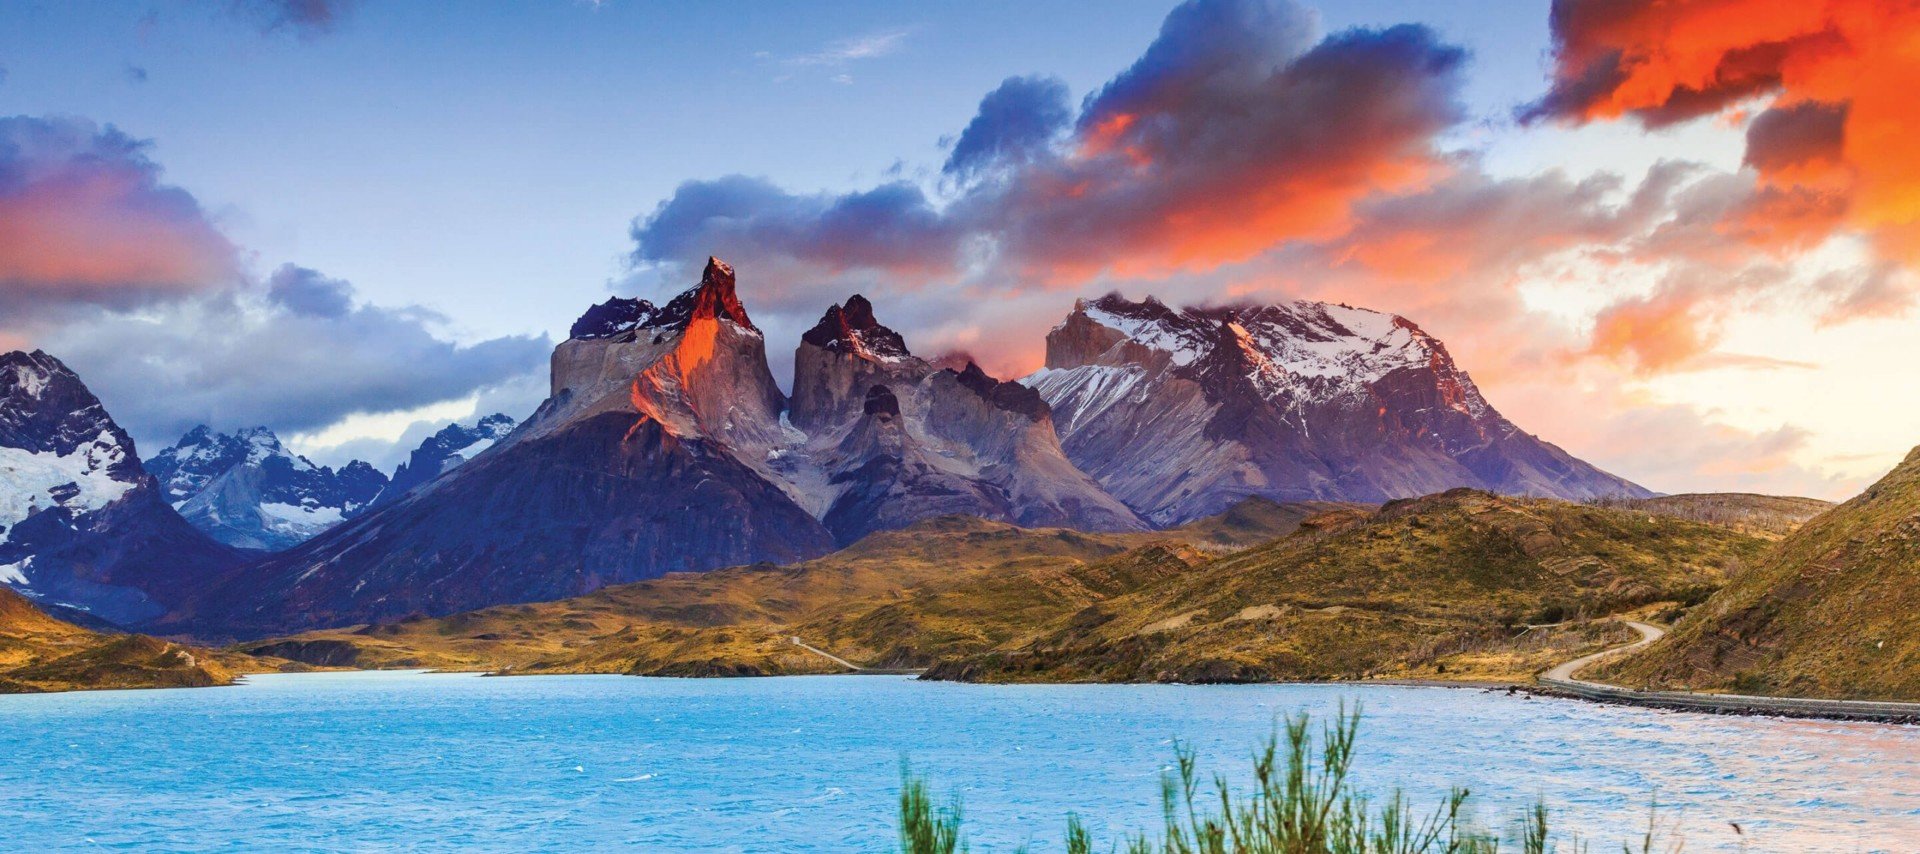 Patagonia sunset at Torres del Paine National Park